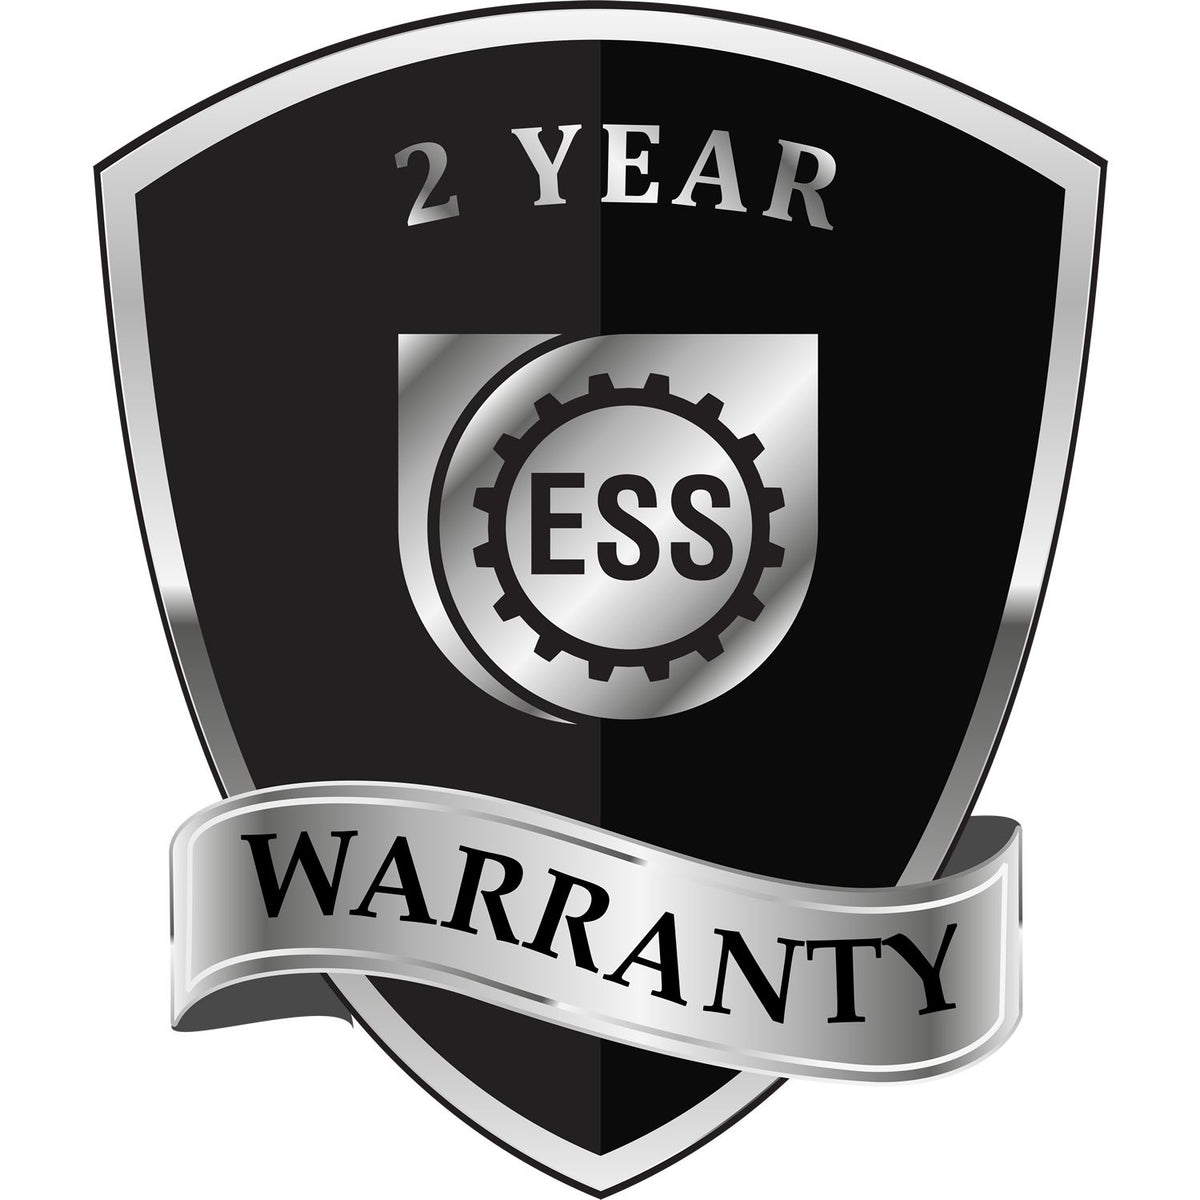 A black and silver badge or emblem showing warranty information for the District of Columbia Geologist Desk Seal